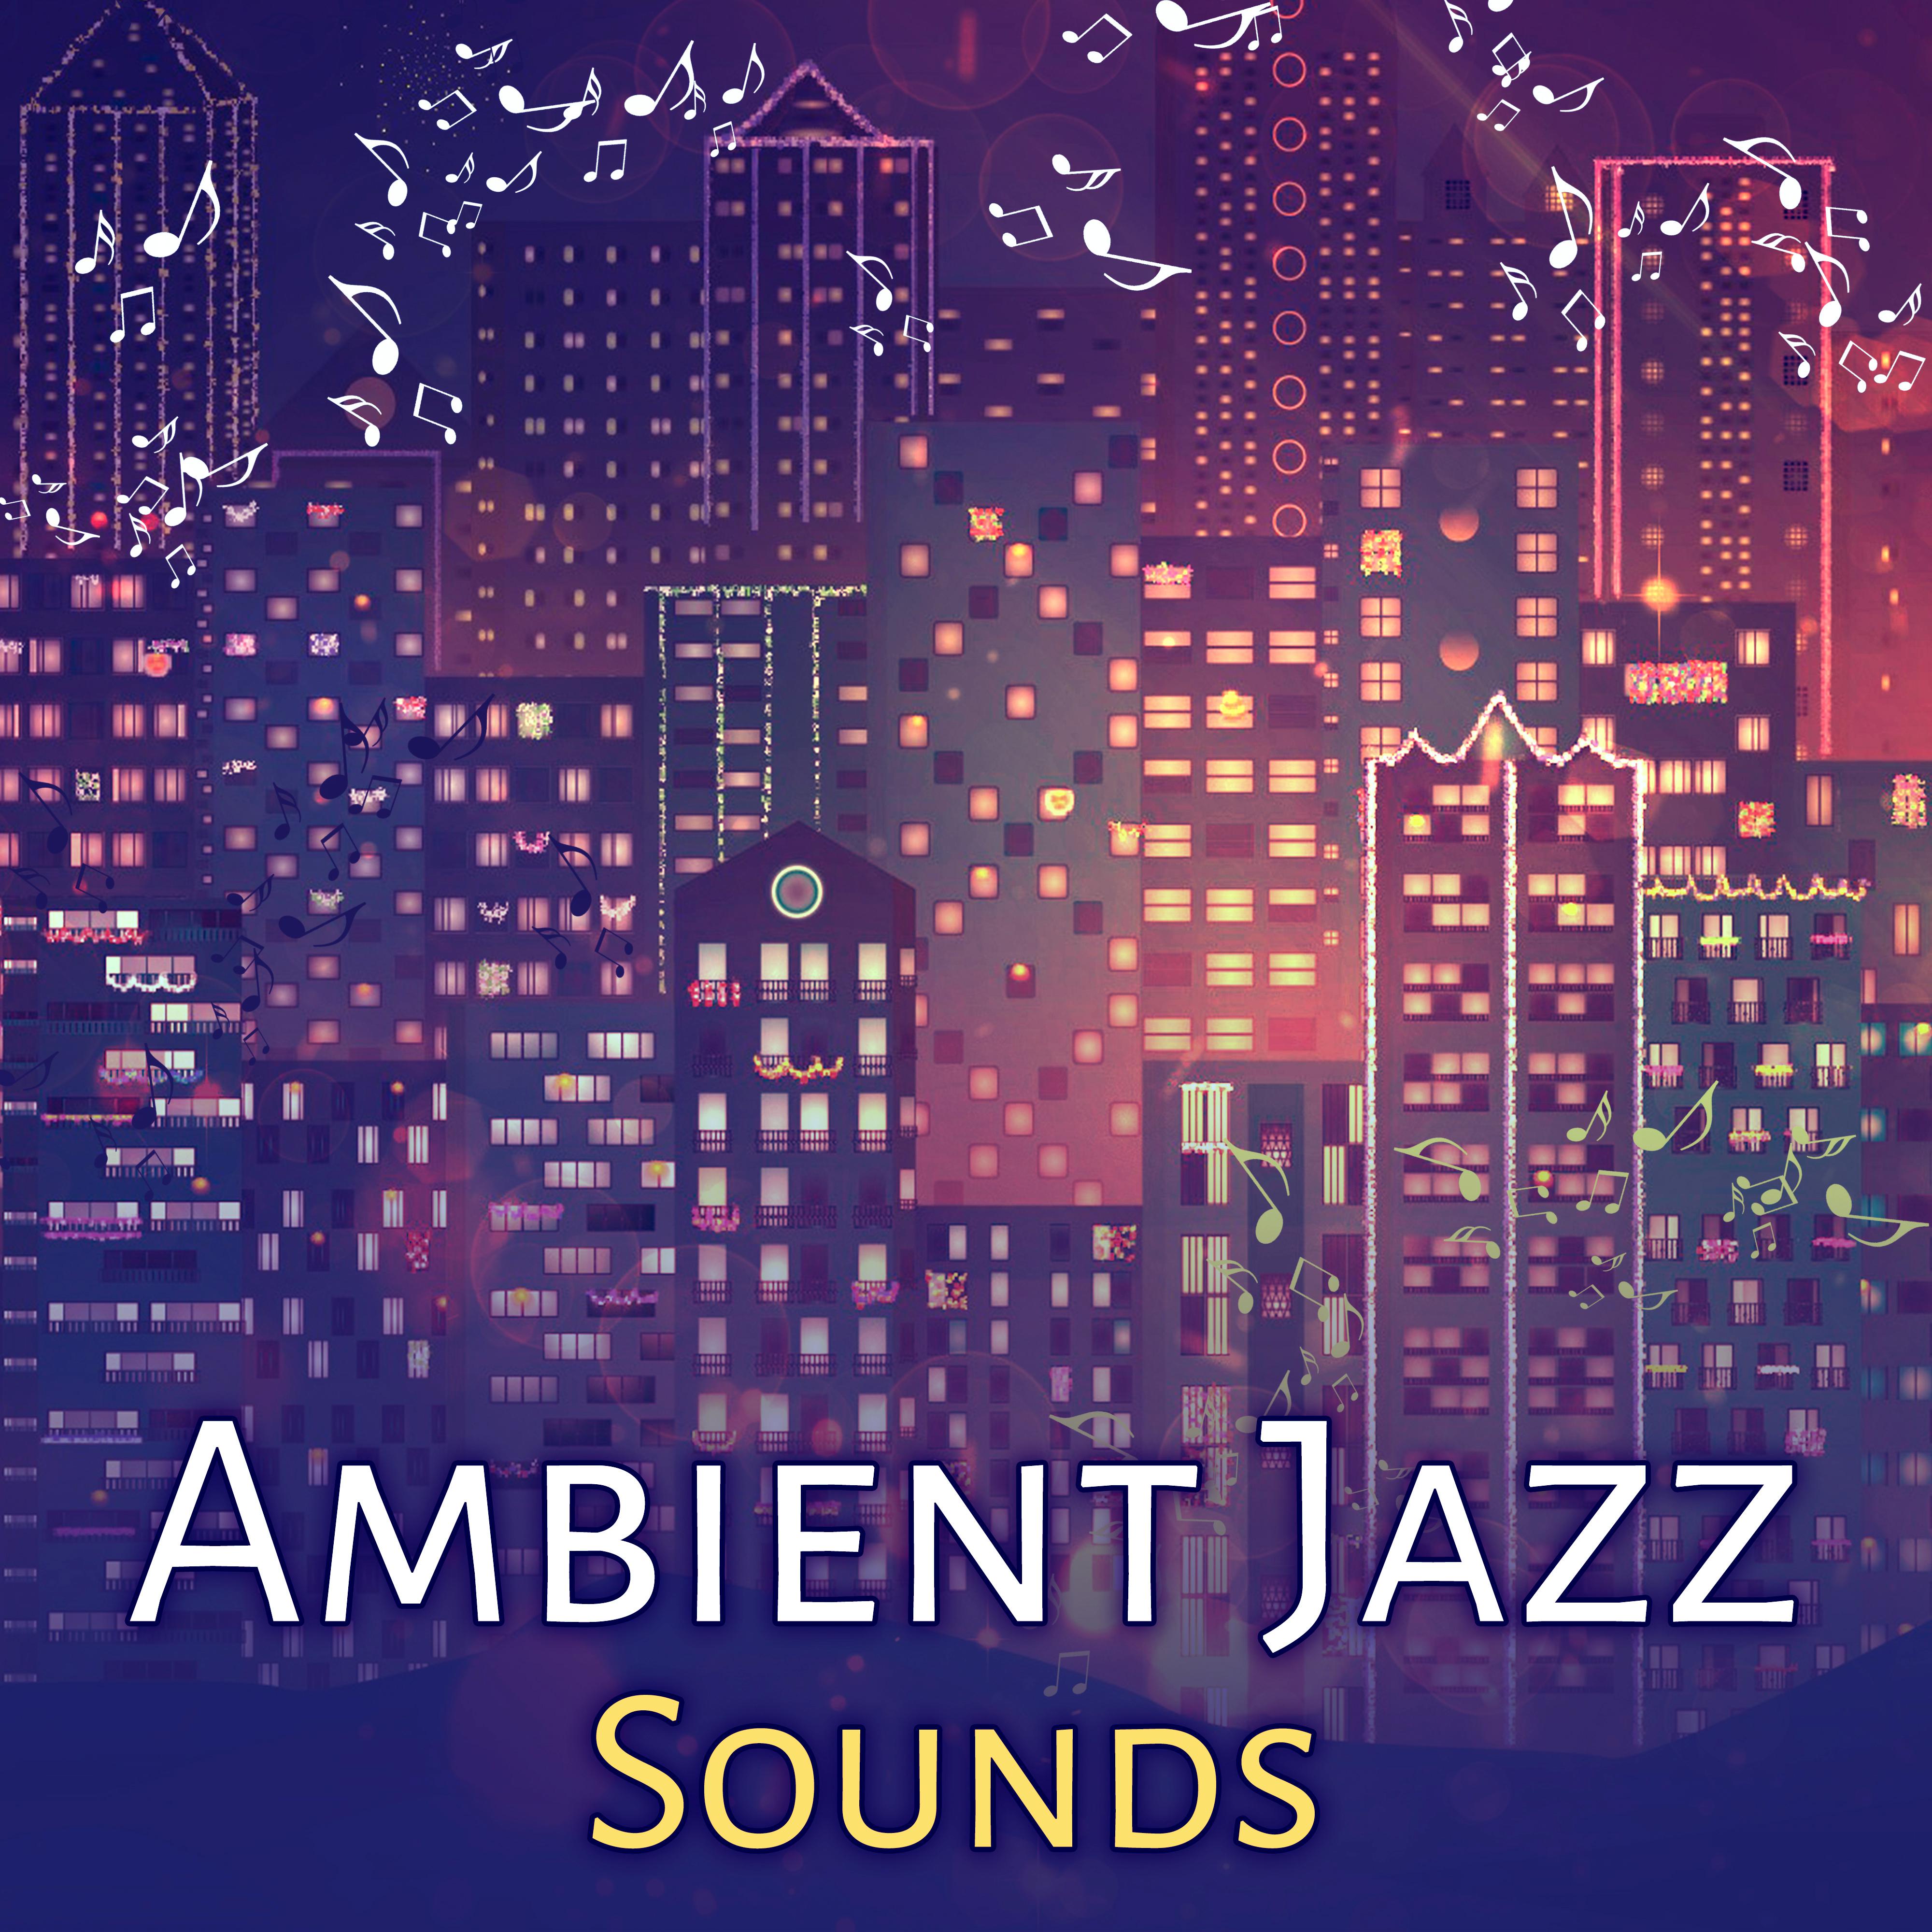 Ambient Jazz Sounds  Instrumental Music for Relaxation, Smooth Piano, Guitar Jazz, Mellow Sounds, Restaurant Melodies